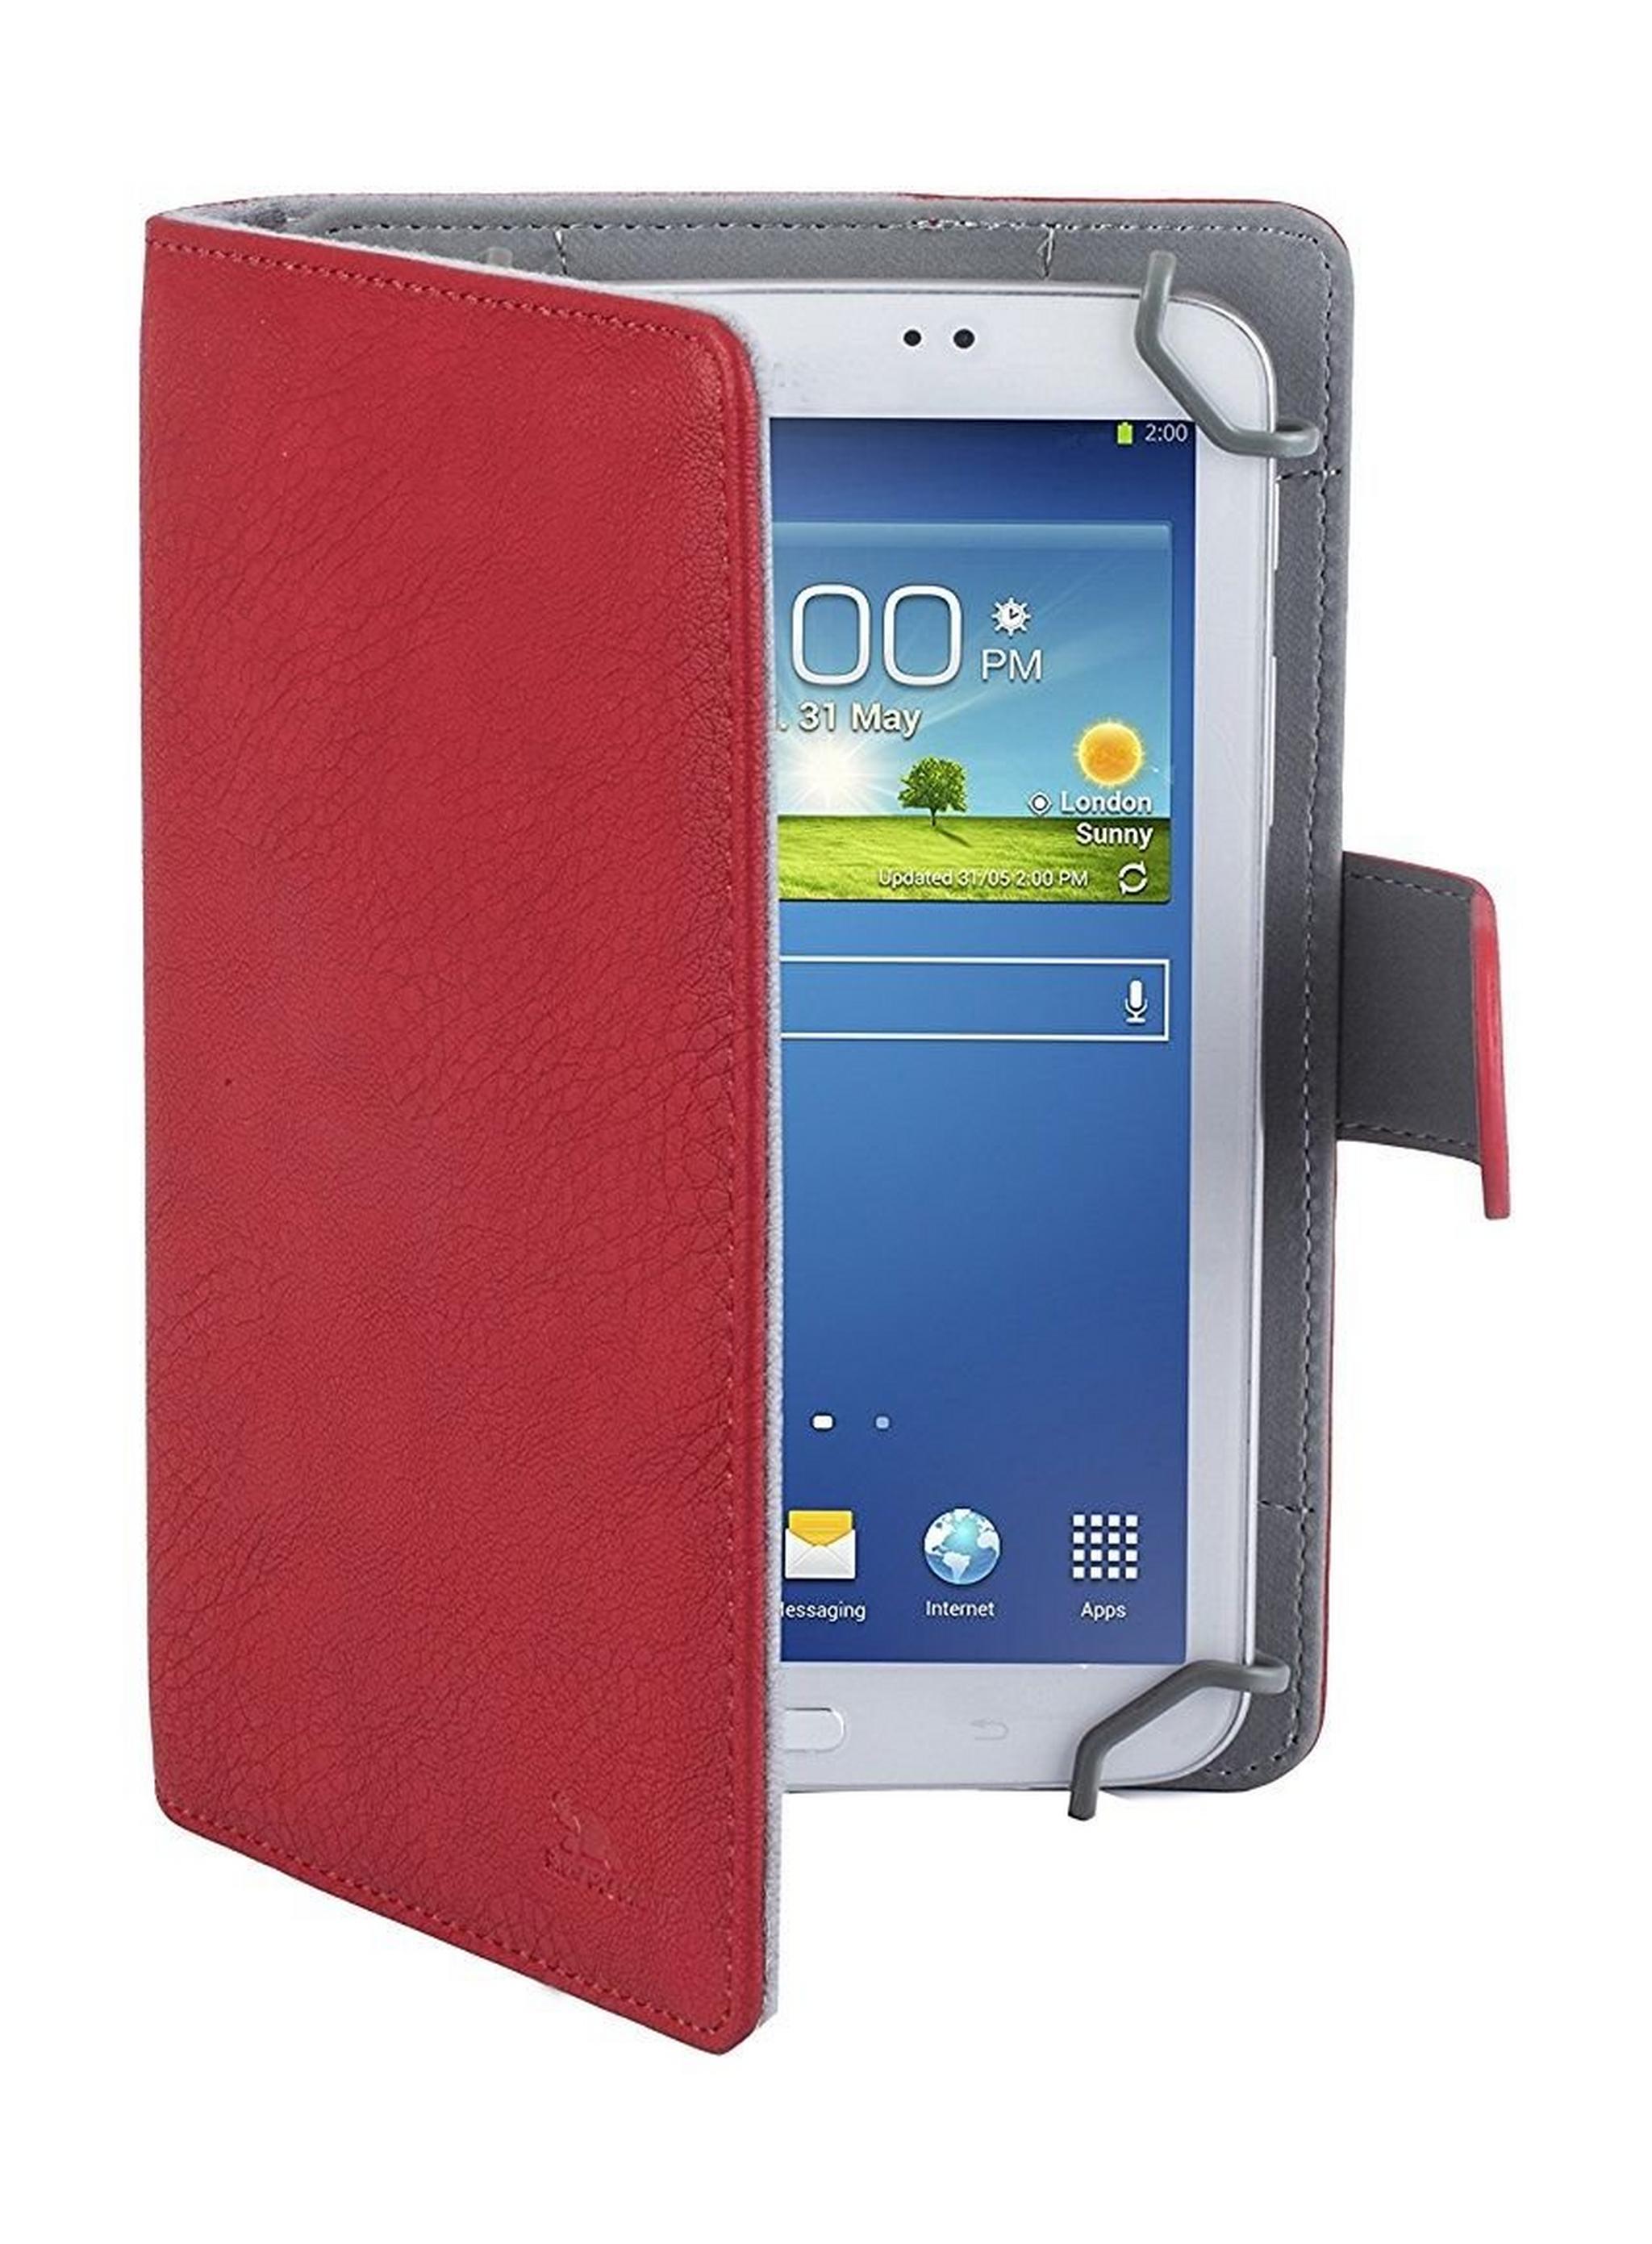 RivaCase Protective Case for 7 inch Tablet (3012) - Red